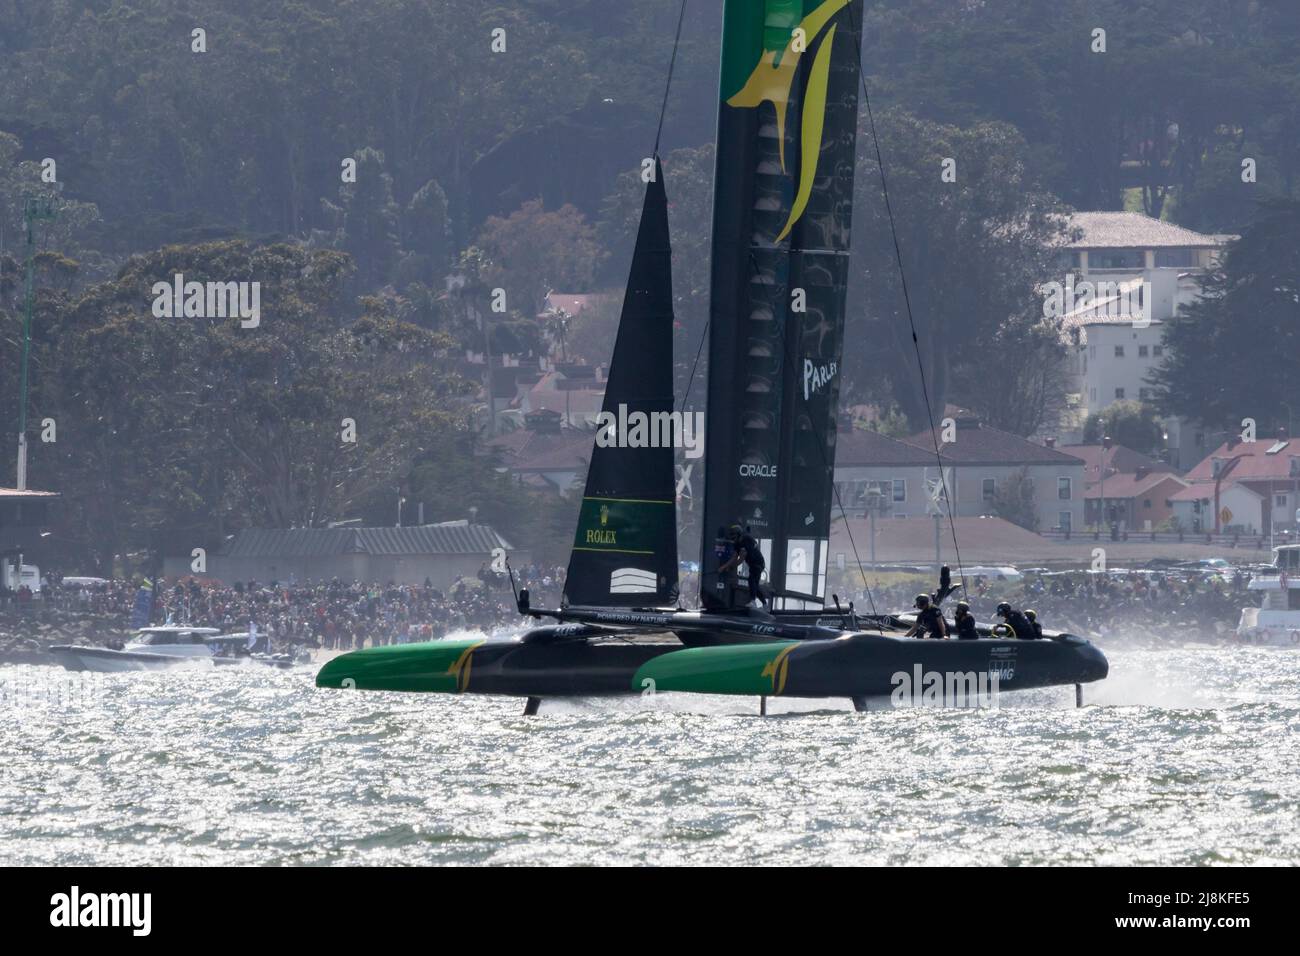 The Australian team races their F50 catamaran on the waters of San Francisco Bay during the 2022 SailGP races. Stock Photo